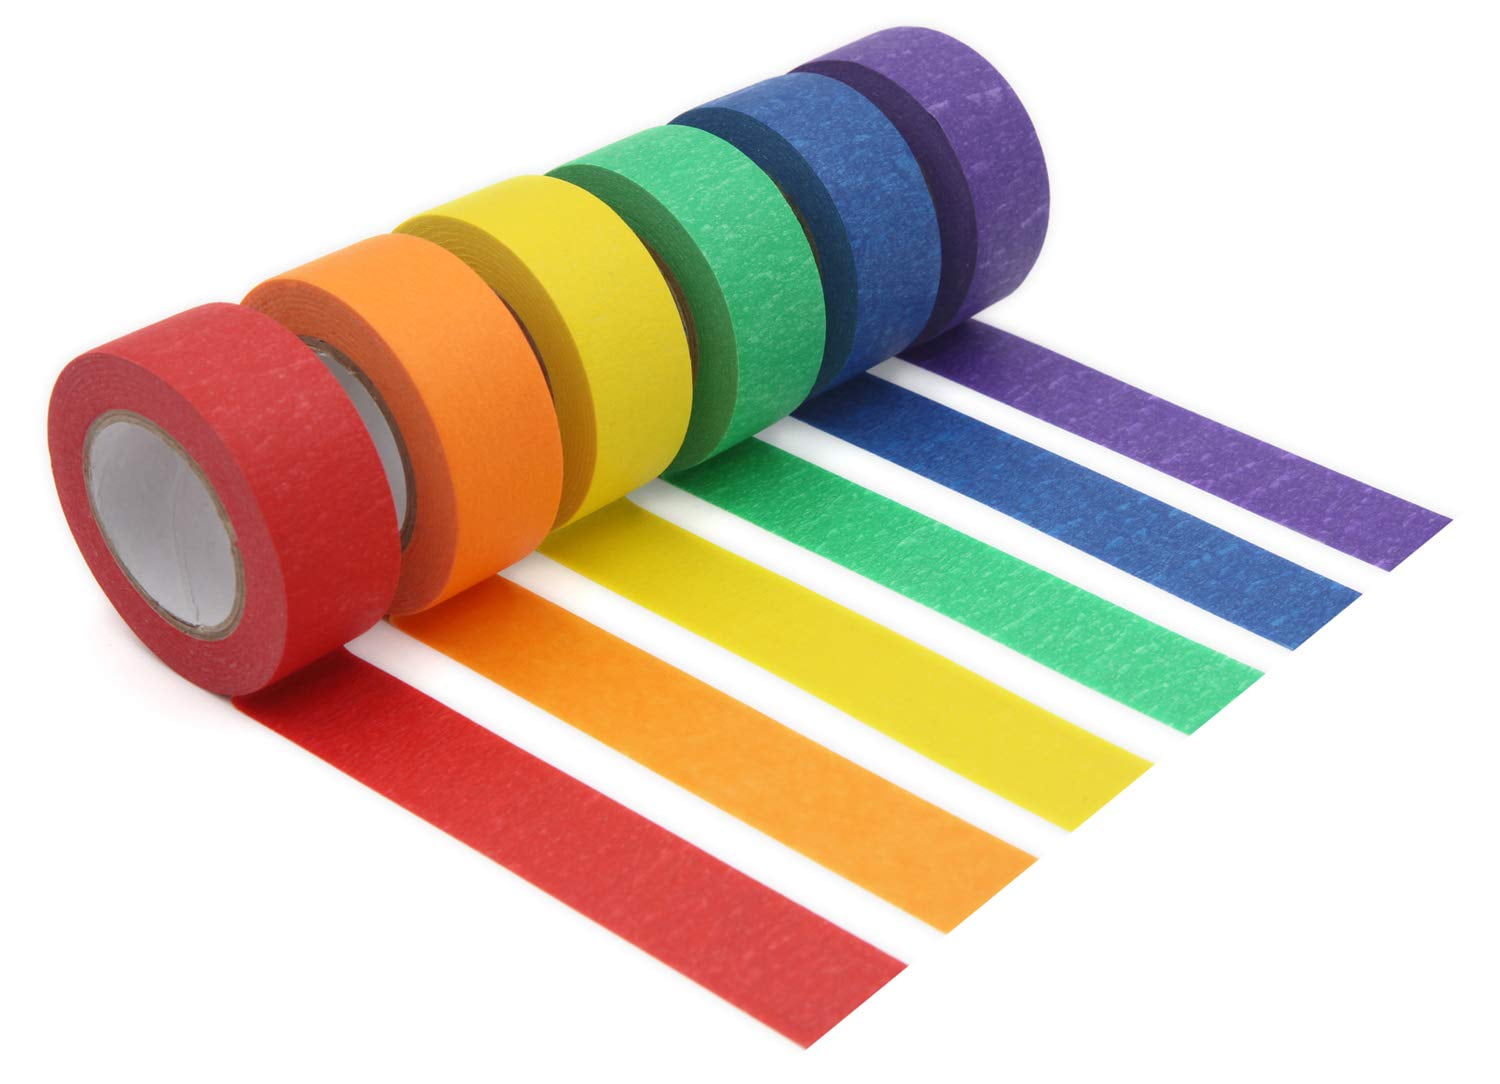 1/2 Inch Thick Masking Tape in 8 Colors! Colorful Tape for Kids, Teachers,  Parents, and More! Perfect for at Home use or in The Classroom. Masking